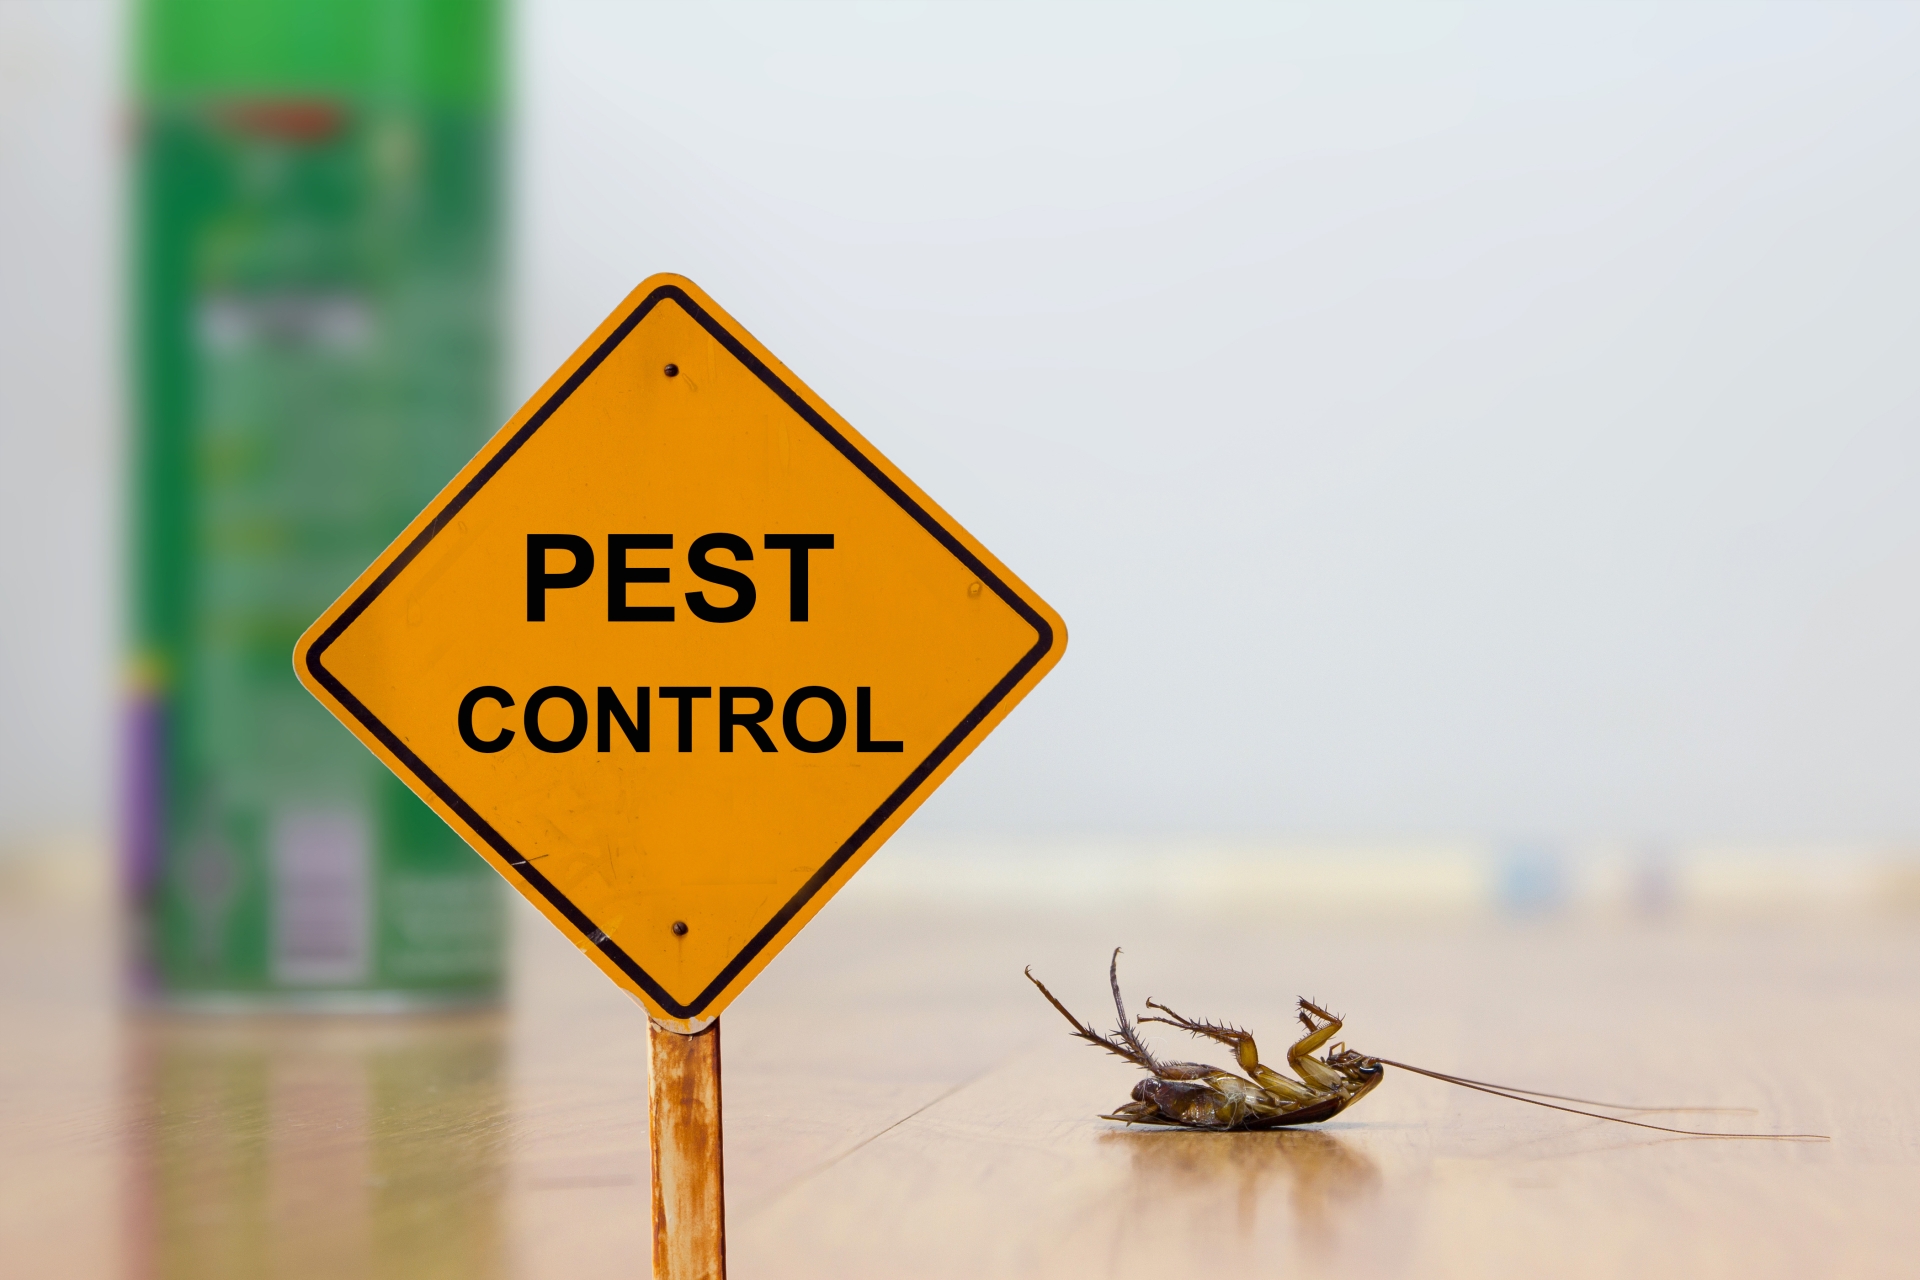 24 Hour Pest Control, Pest Control in Highgate, N6. Call Now 020 8166 9746